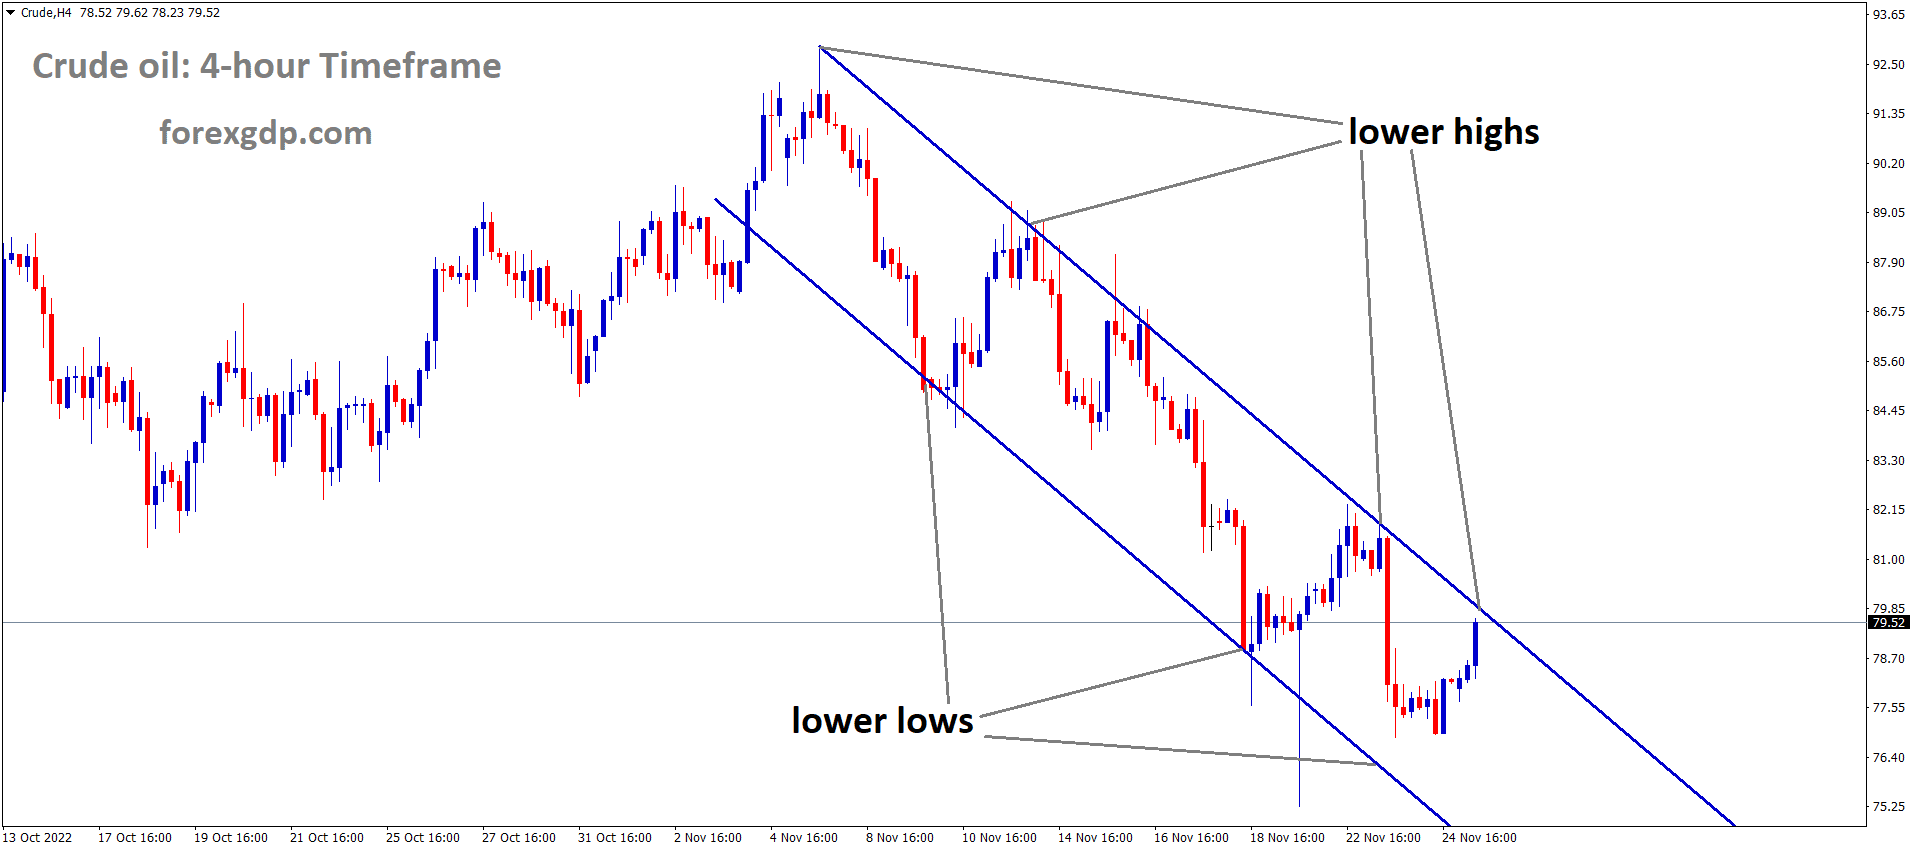 Crude oil is moving in the Descending channel and the market has reached the lower high area of the channel 3